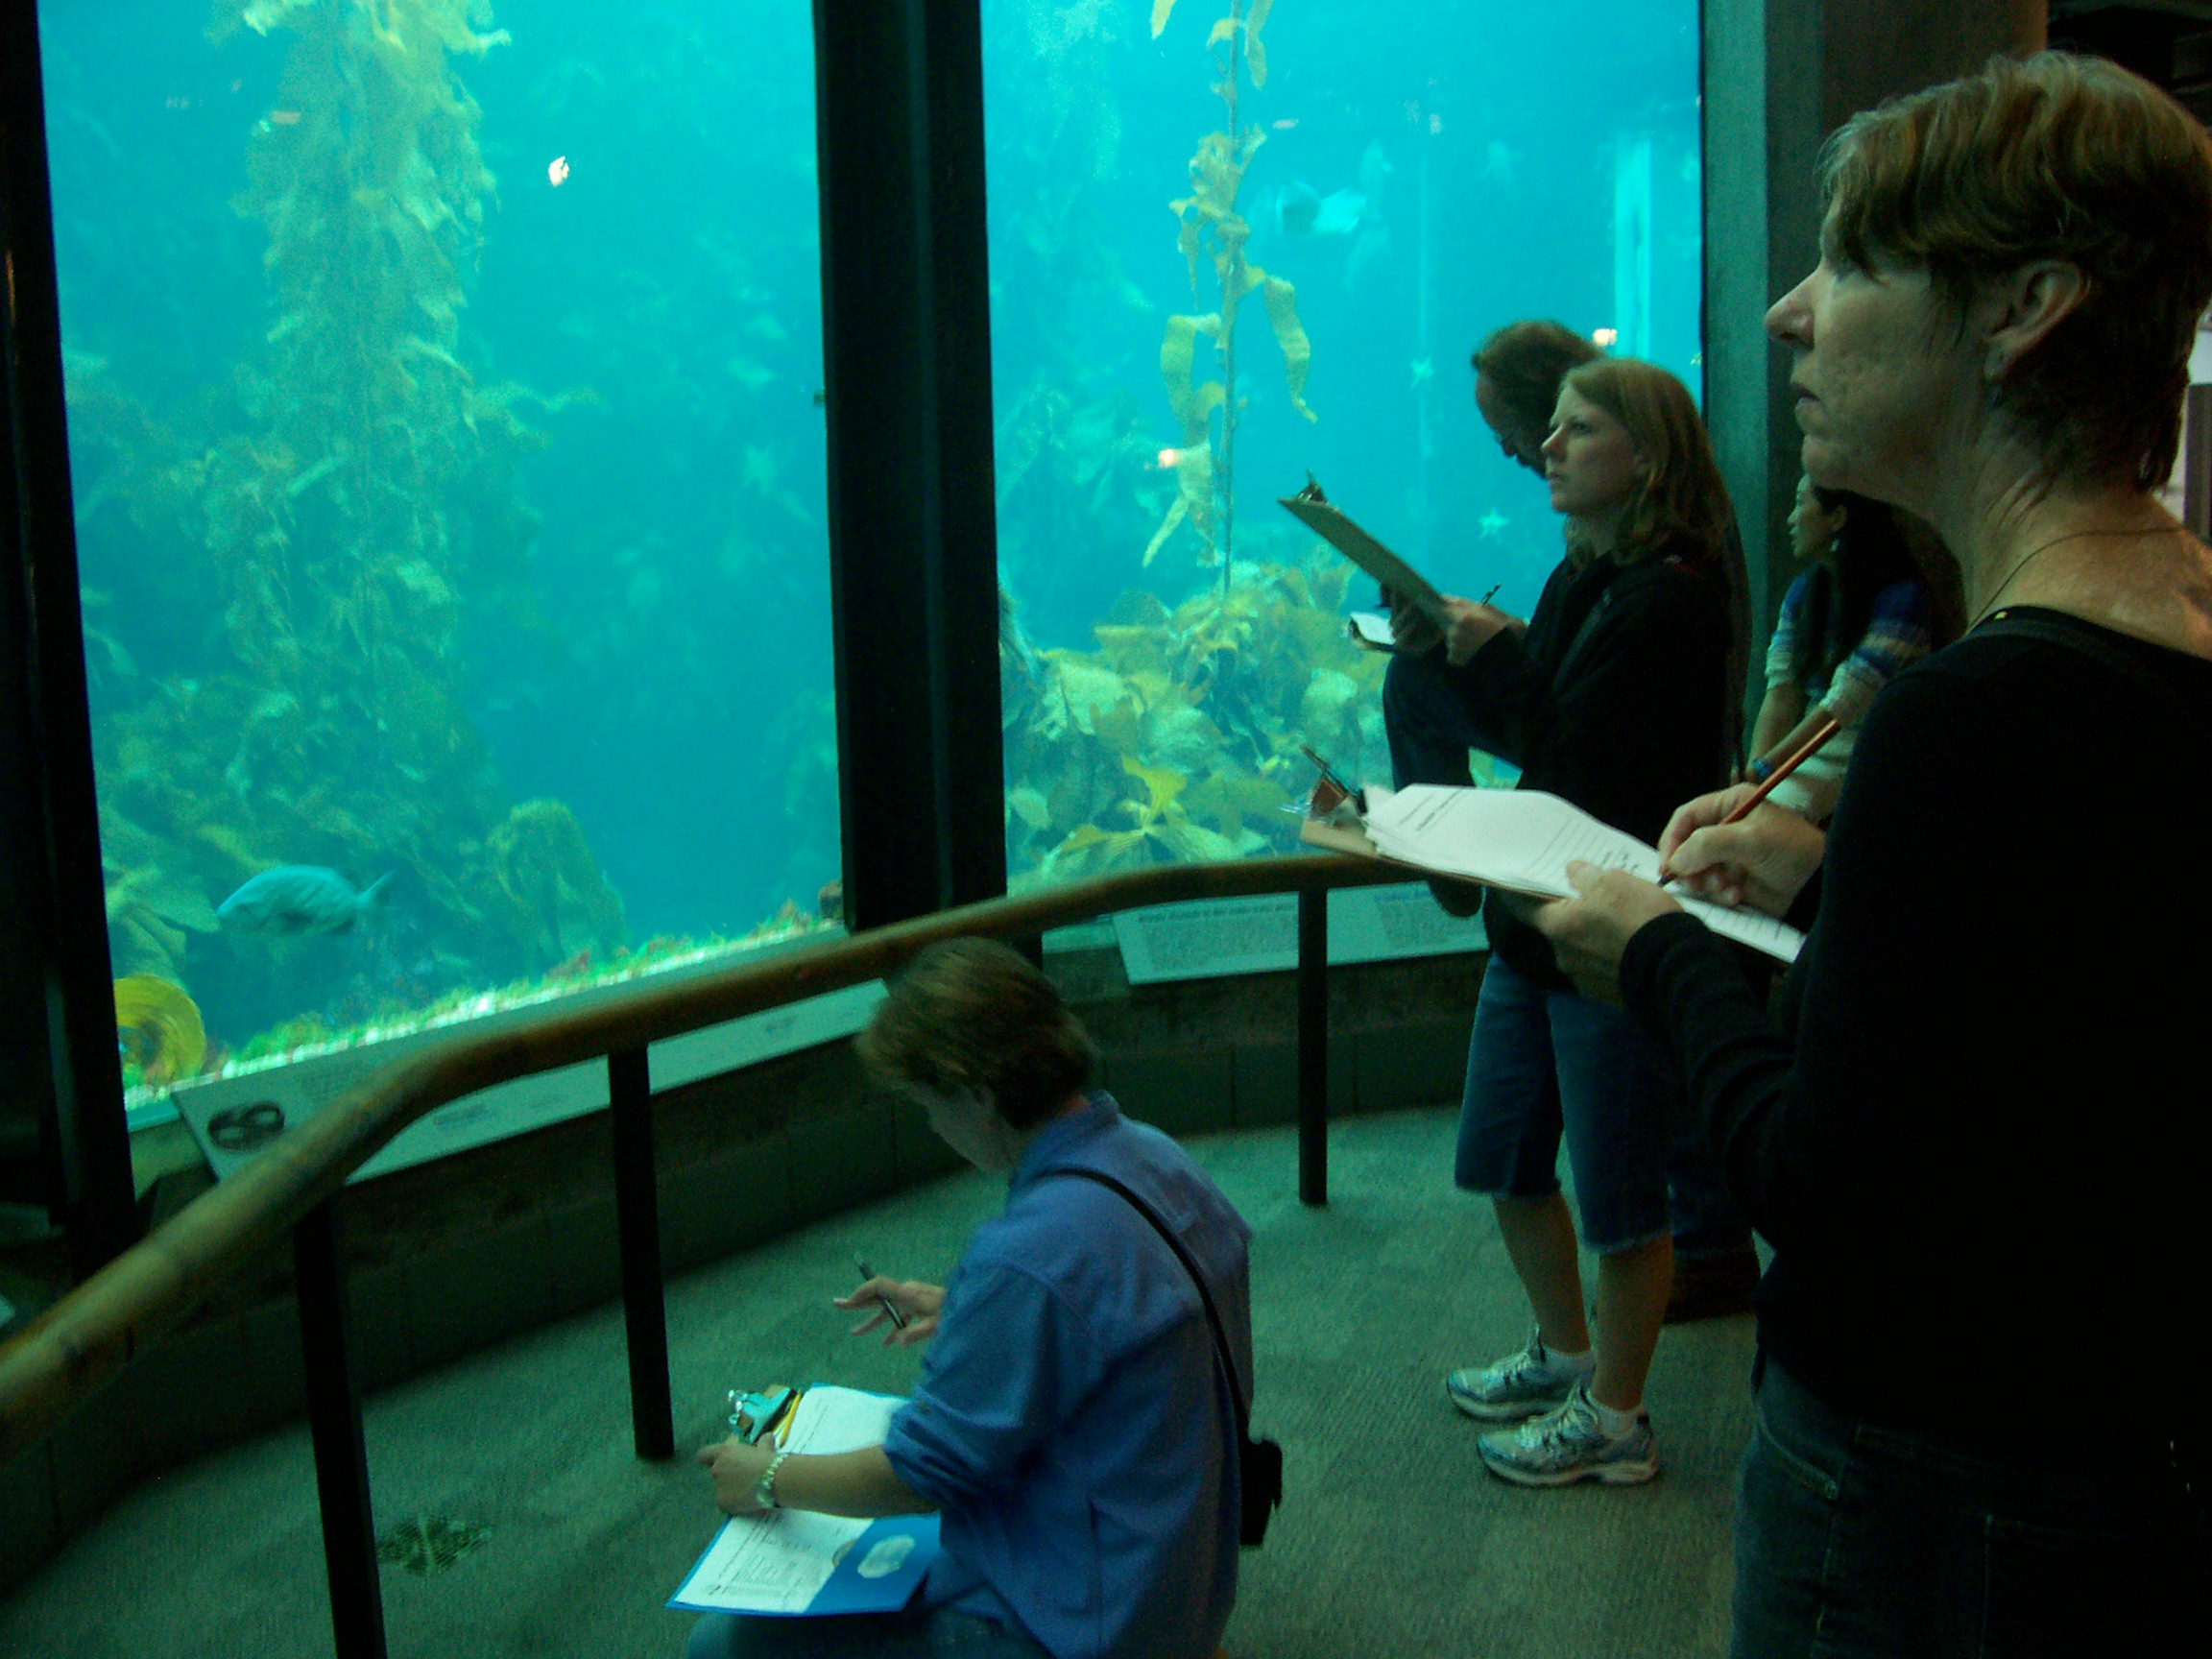 Observing and sketching sharks at the Monterey Bay Aquarium